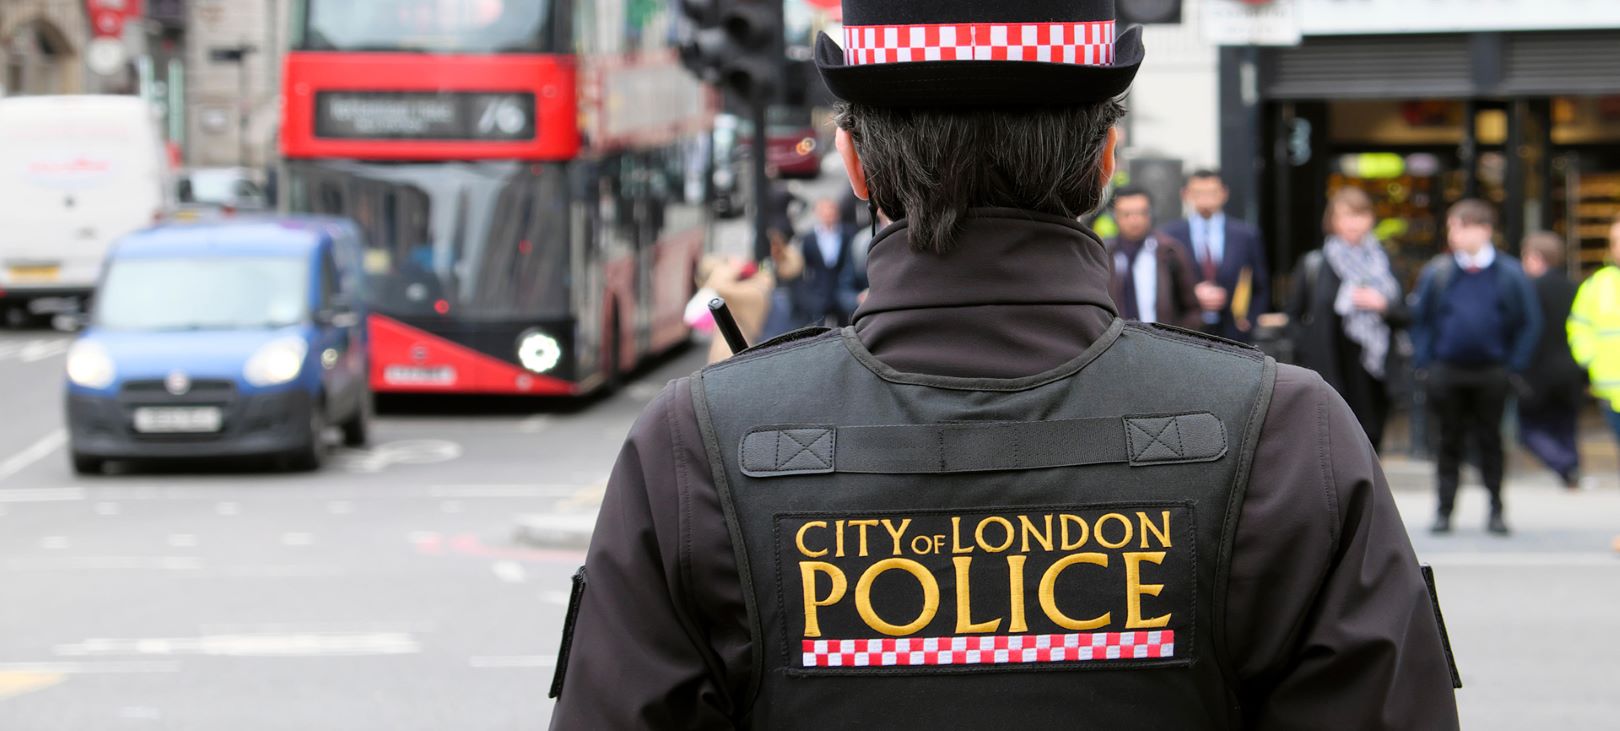 Image of the back of a female City of London police officer standing on the street with a red bus approaching used on Guildhawk government AI-powered translation solutions